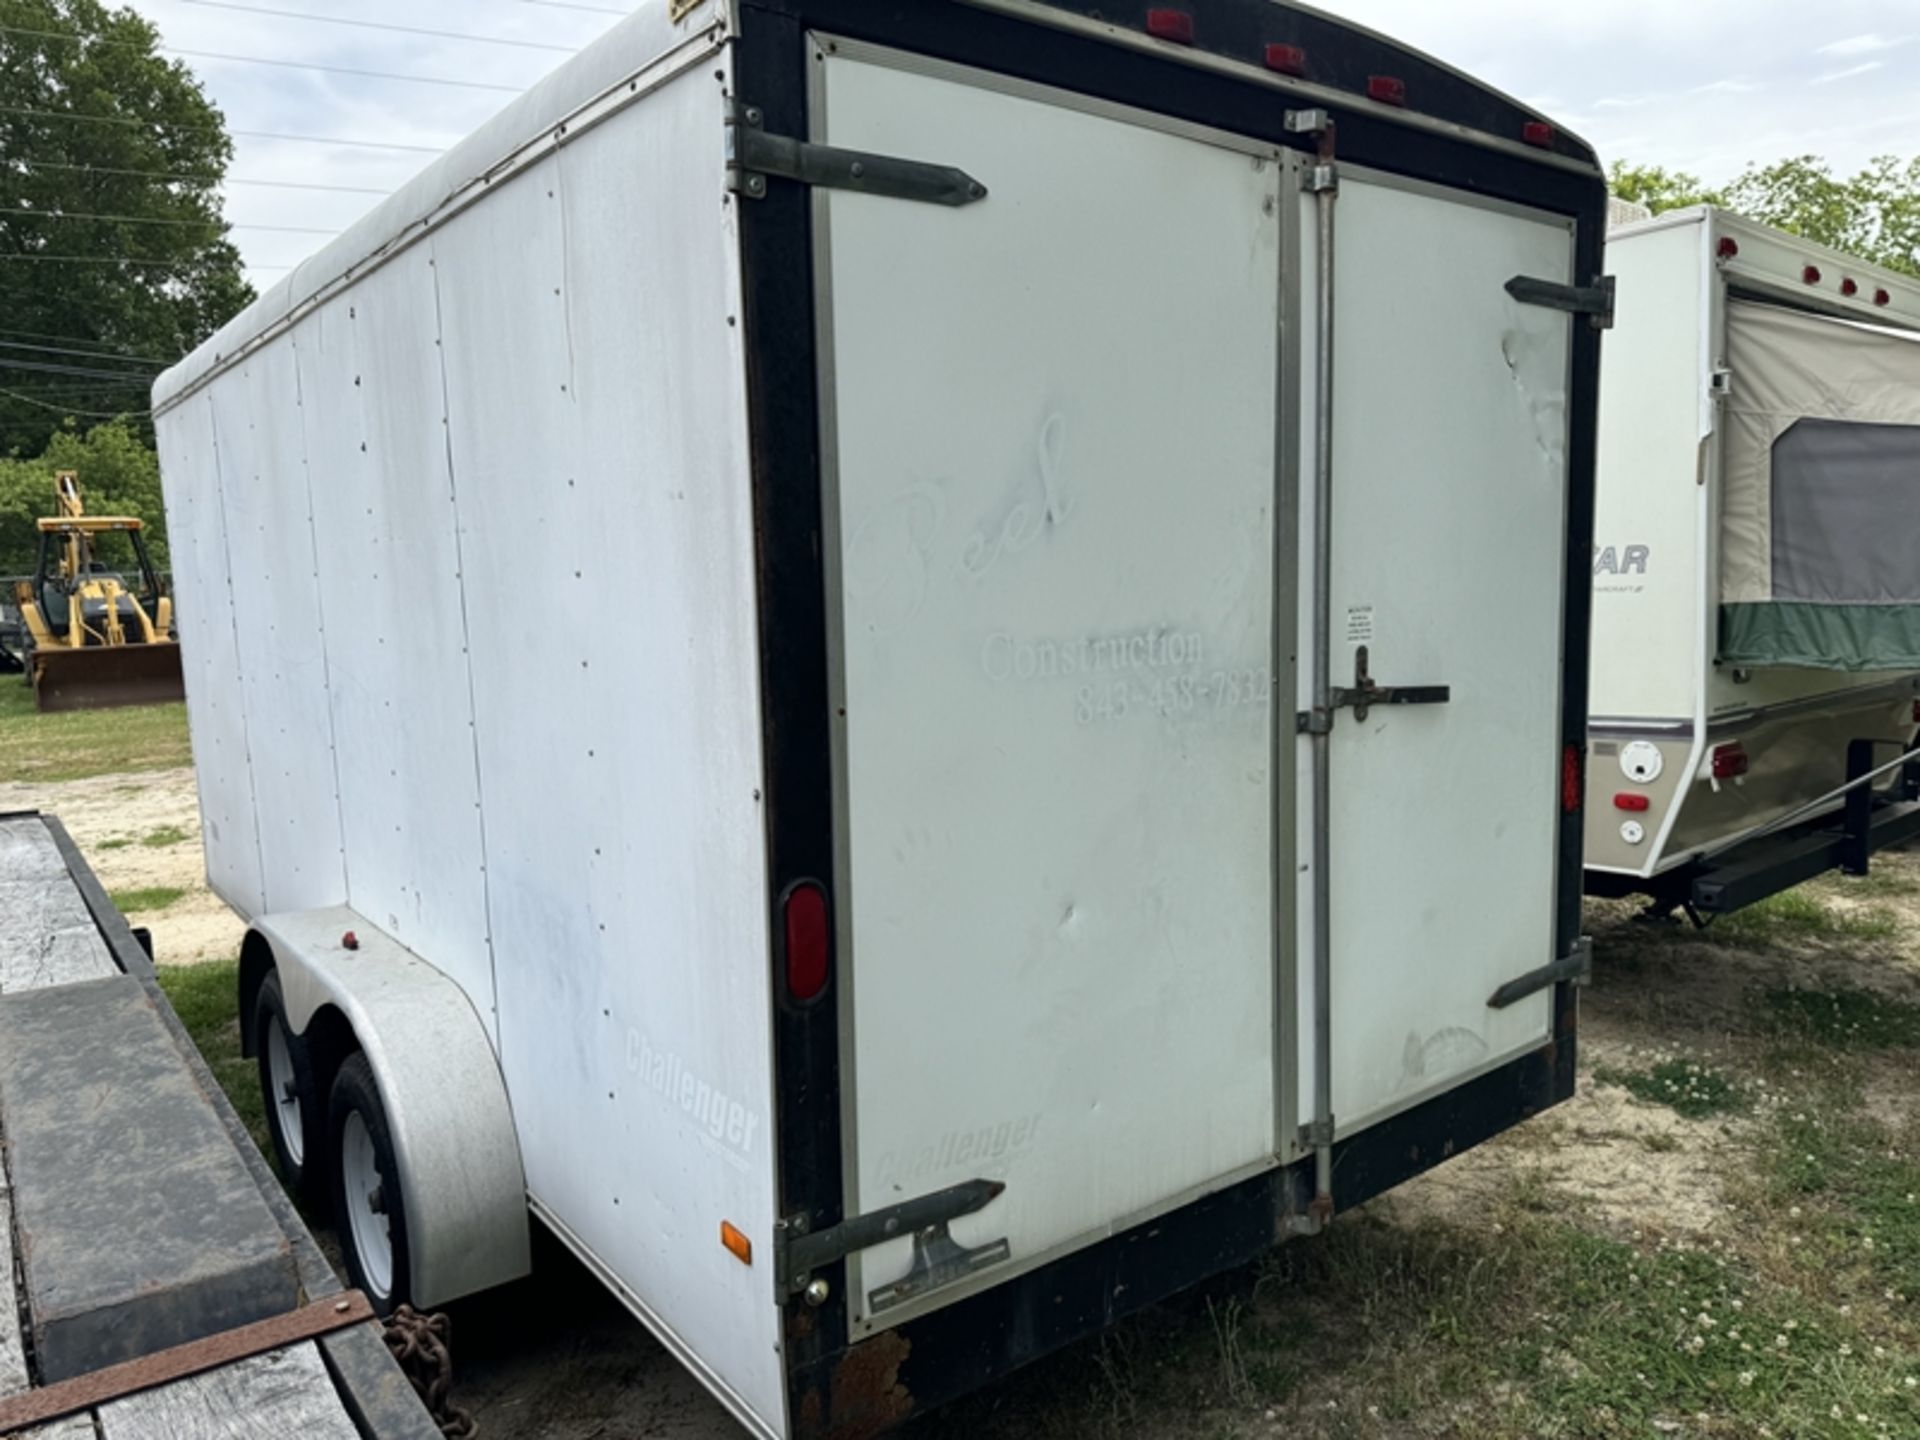 2001 HOMESTEADER 16' dual-axle enclosed trailer with barn doors and side door - 5HABA162111014686 - Image 4 of 5